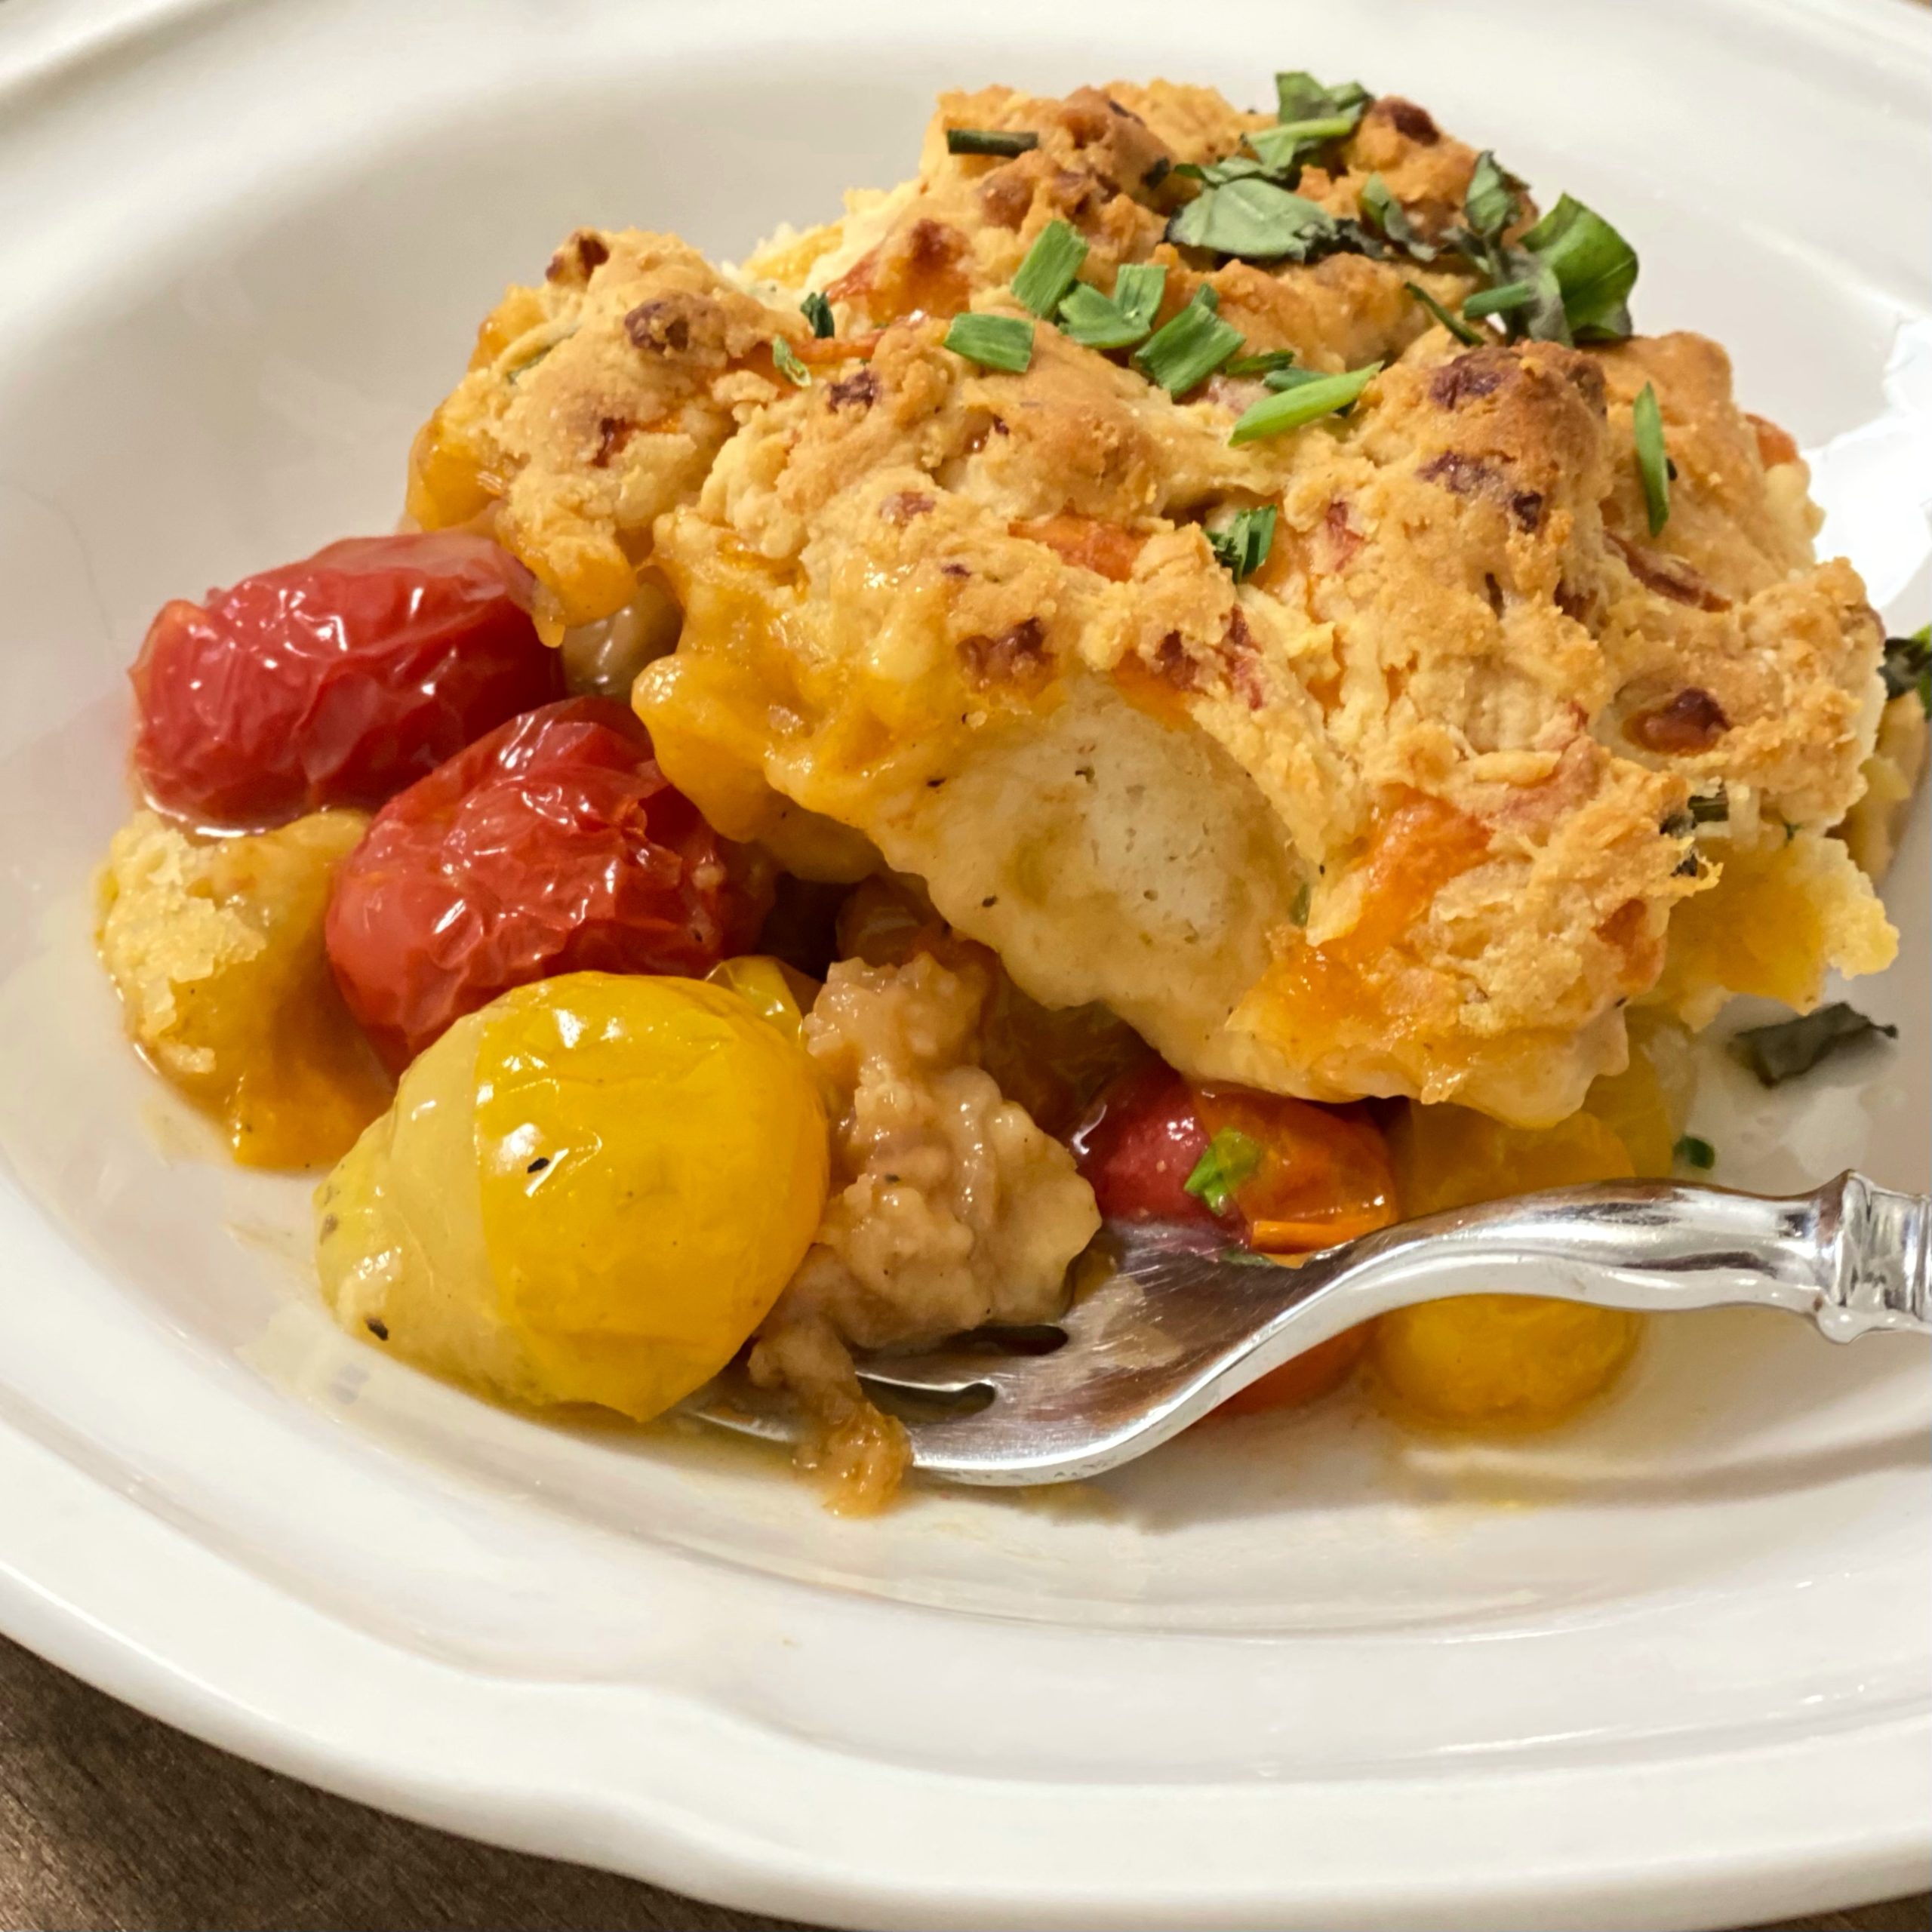 A serving of Tomato Cobbler in a white bowl with a fork. The yellow and red tomatoes look juicy and the biscuit topping is golden brown.